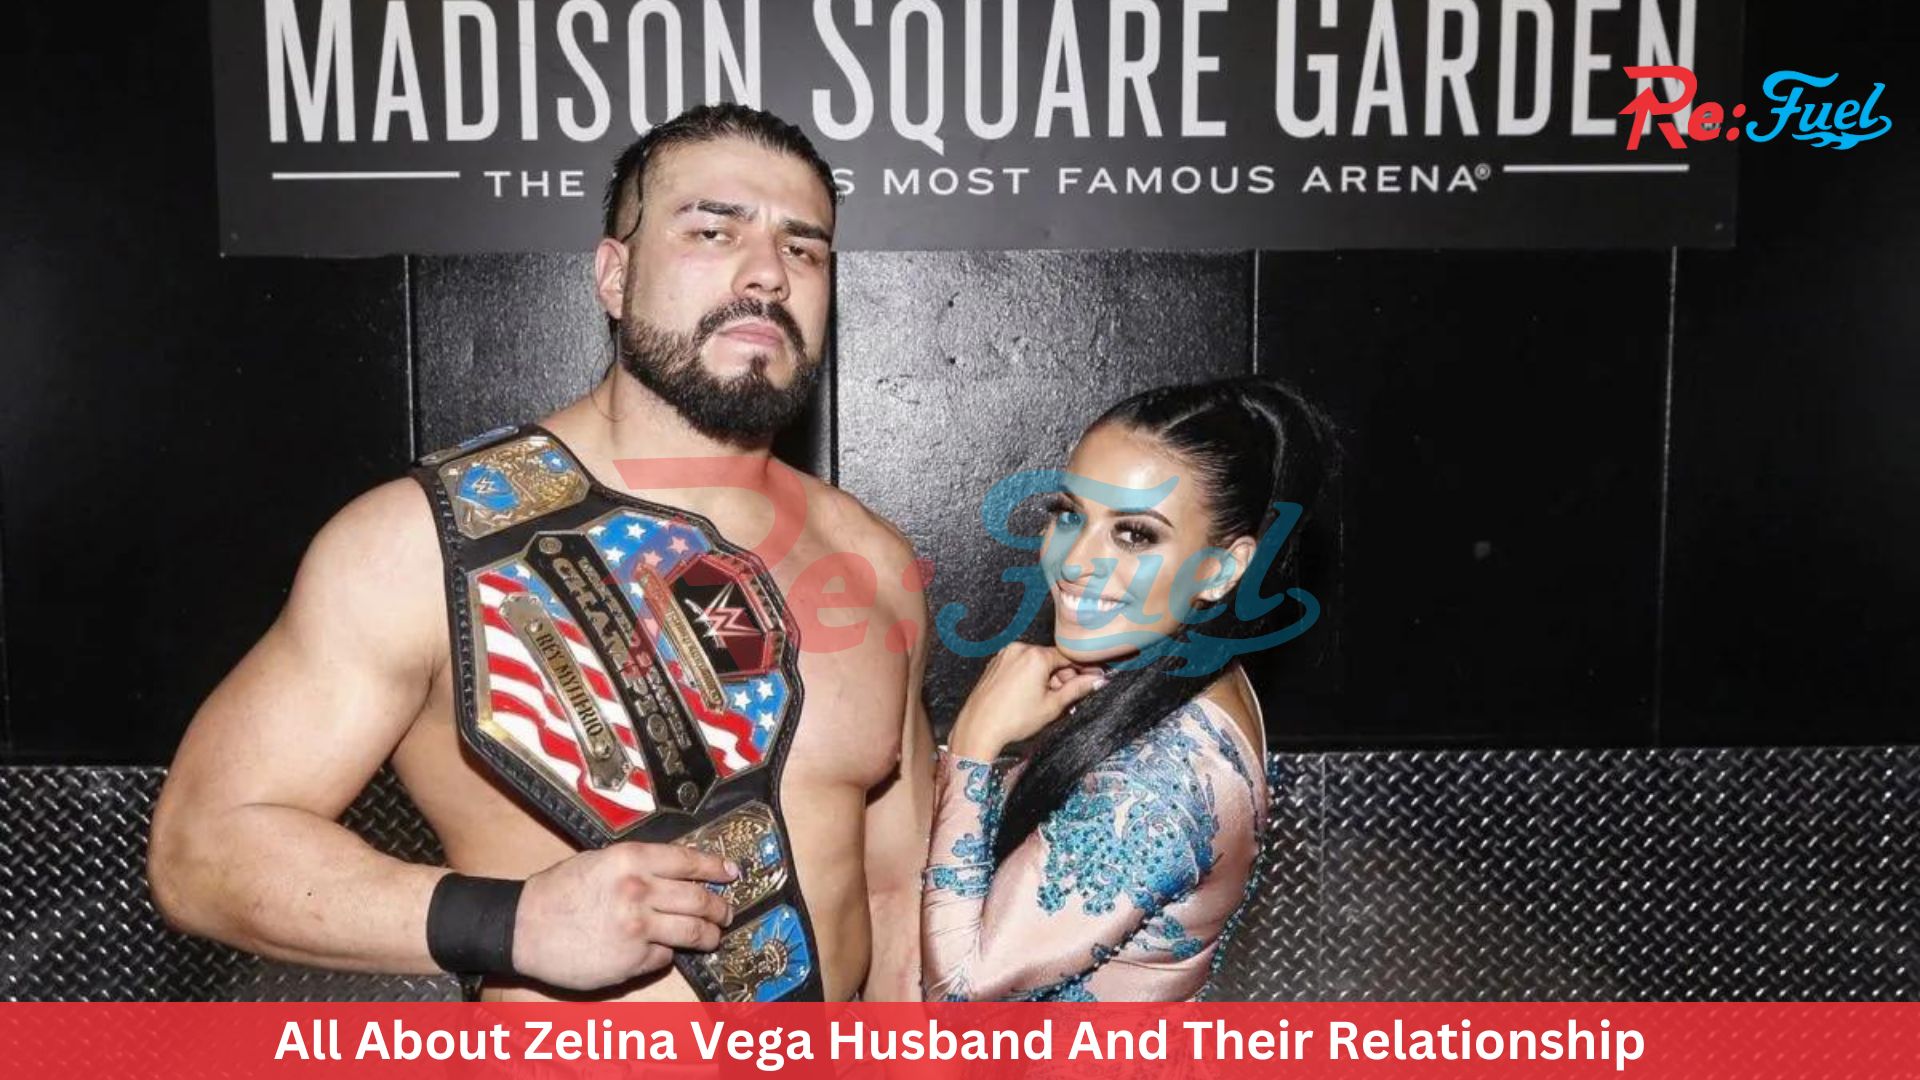 All About Zelina Vega Husband And Their Relationship